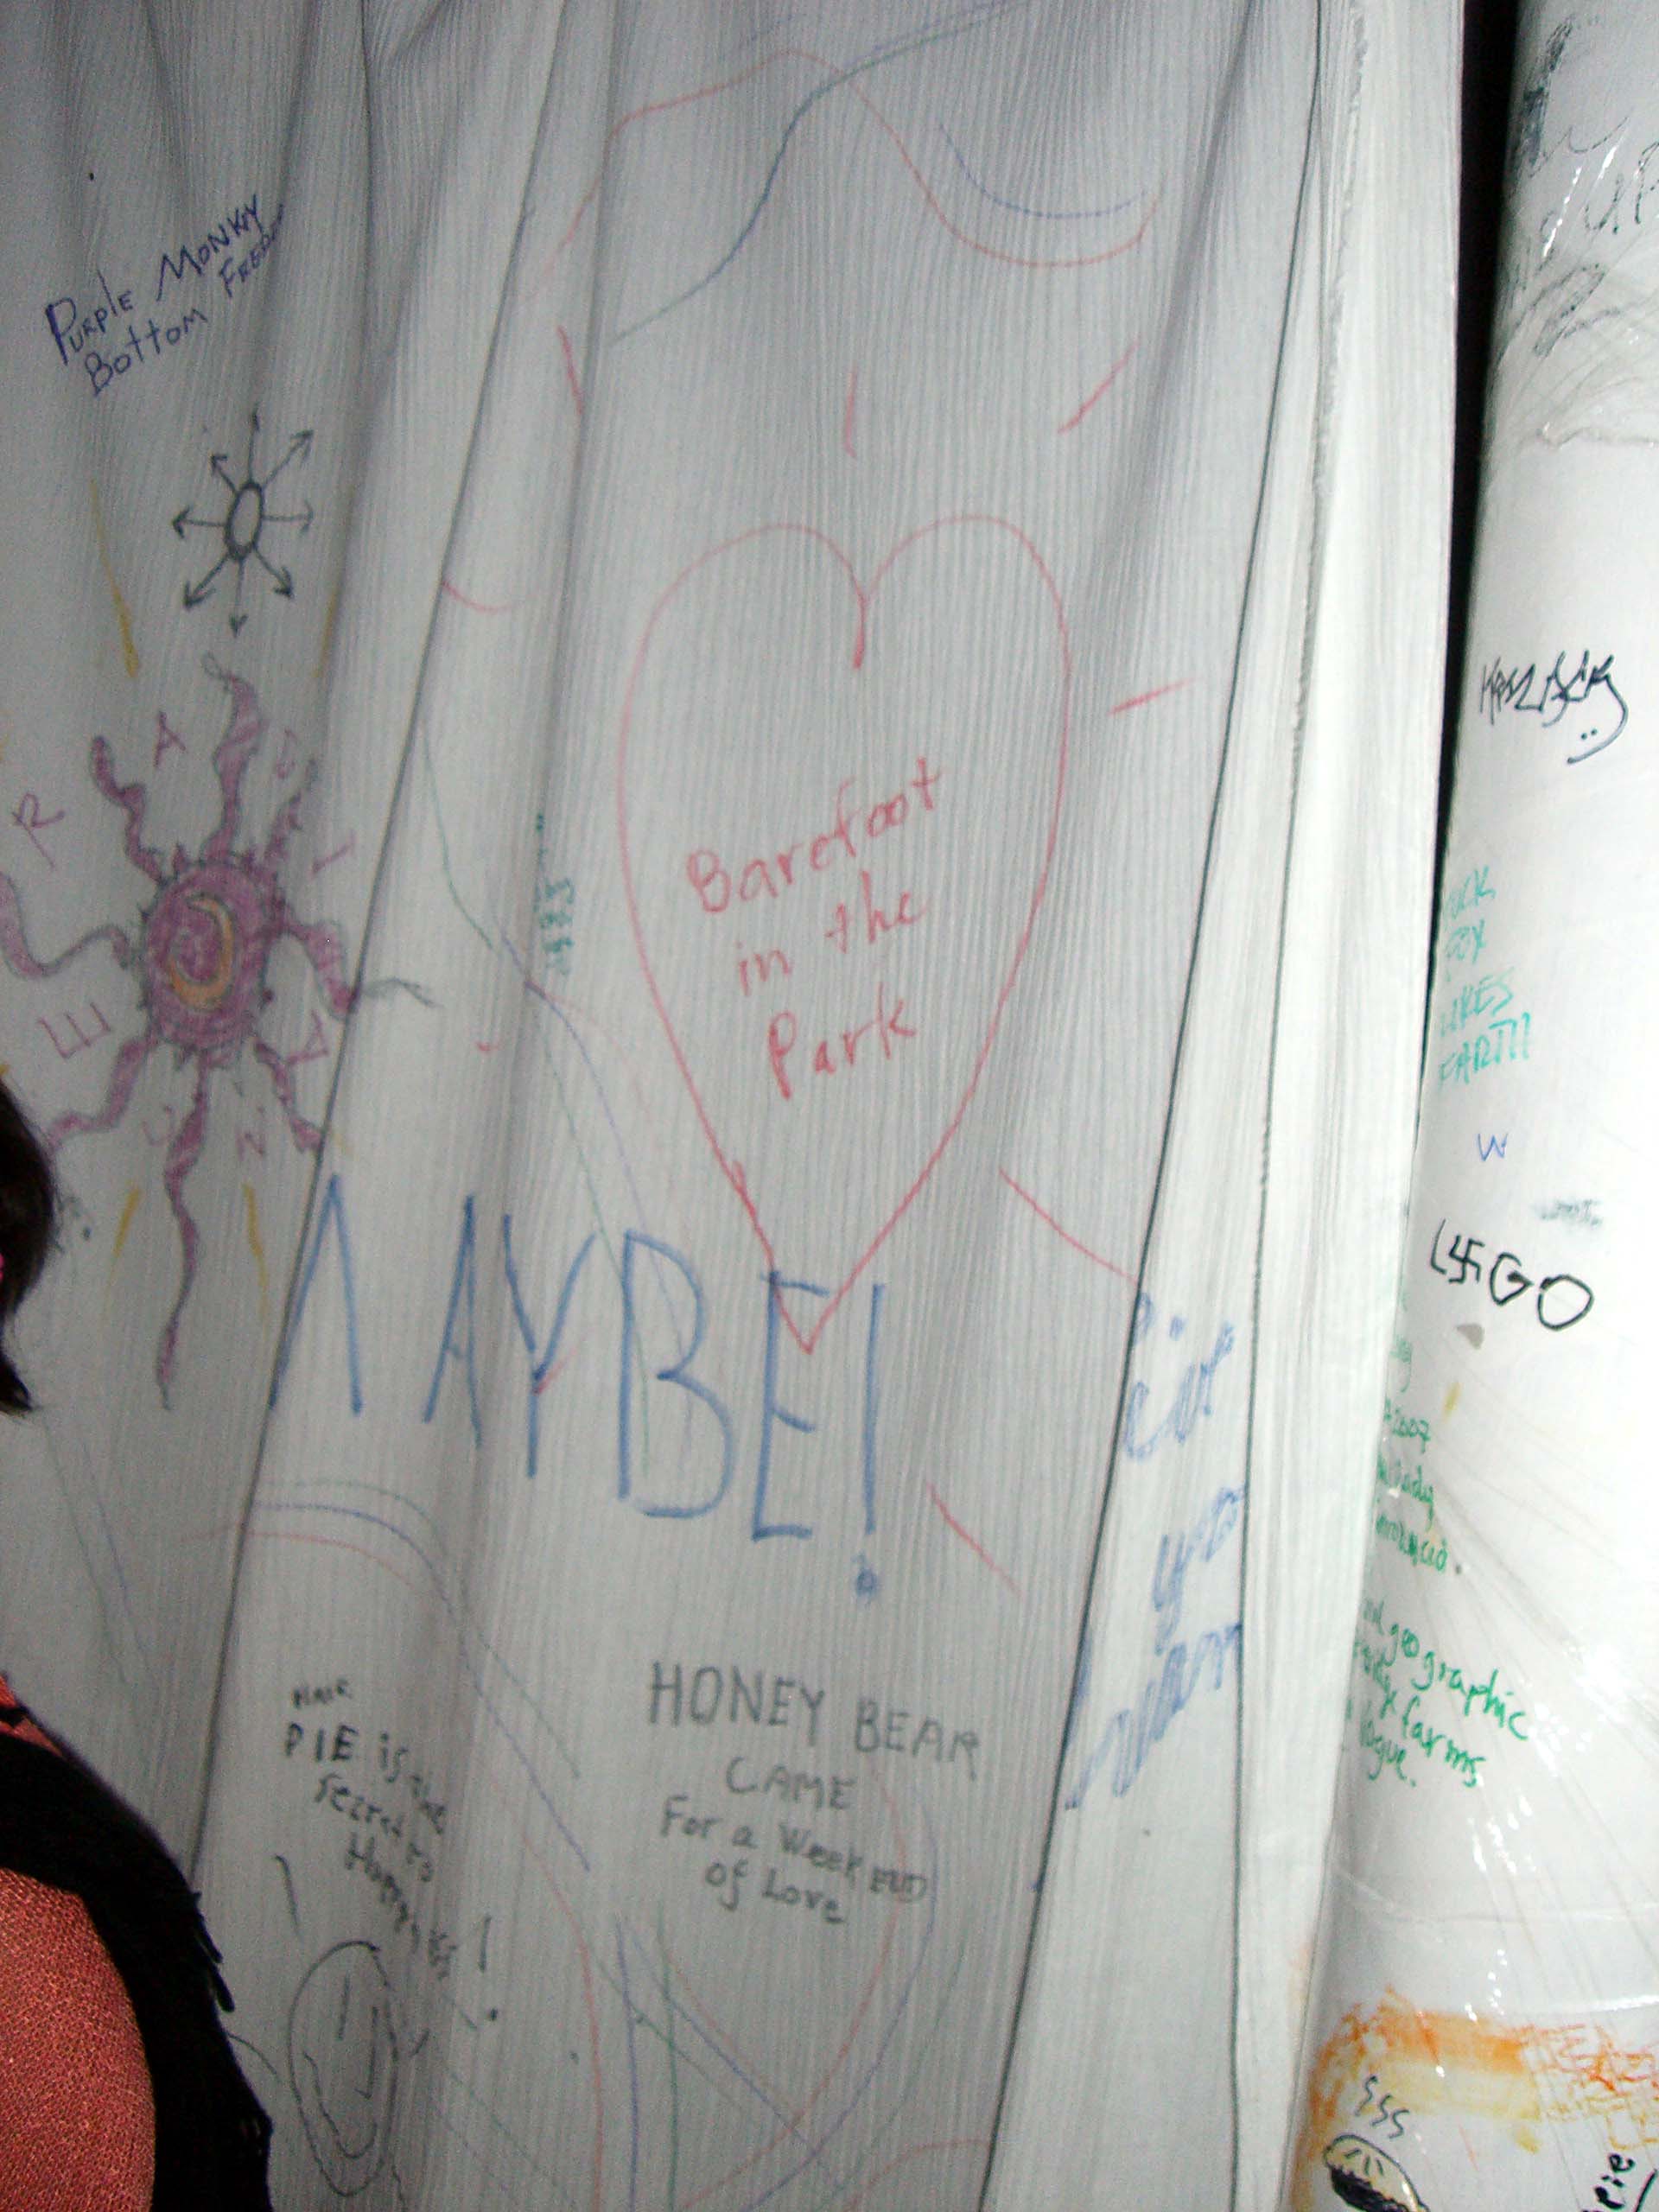 Sheets inside the booth